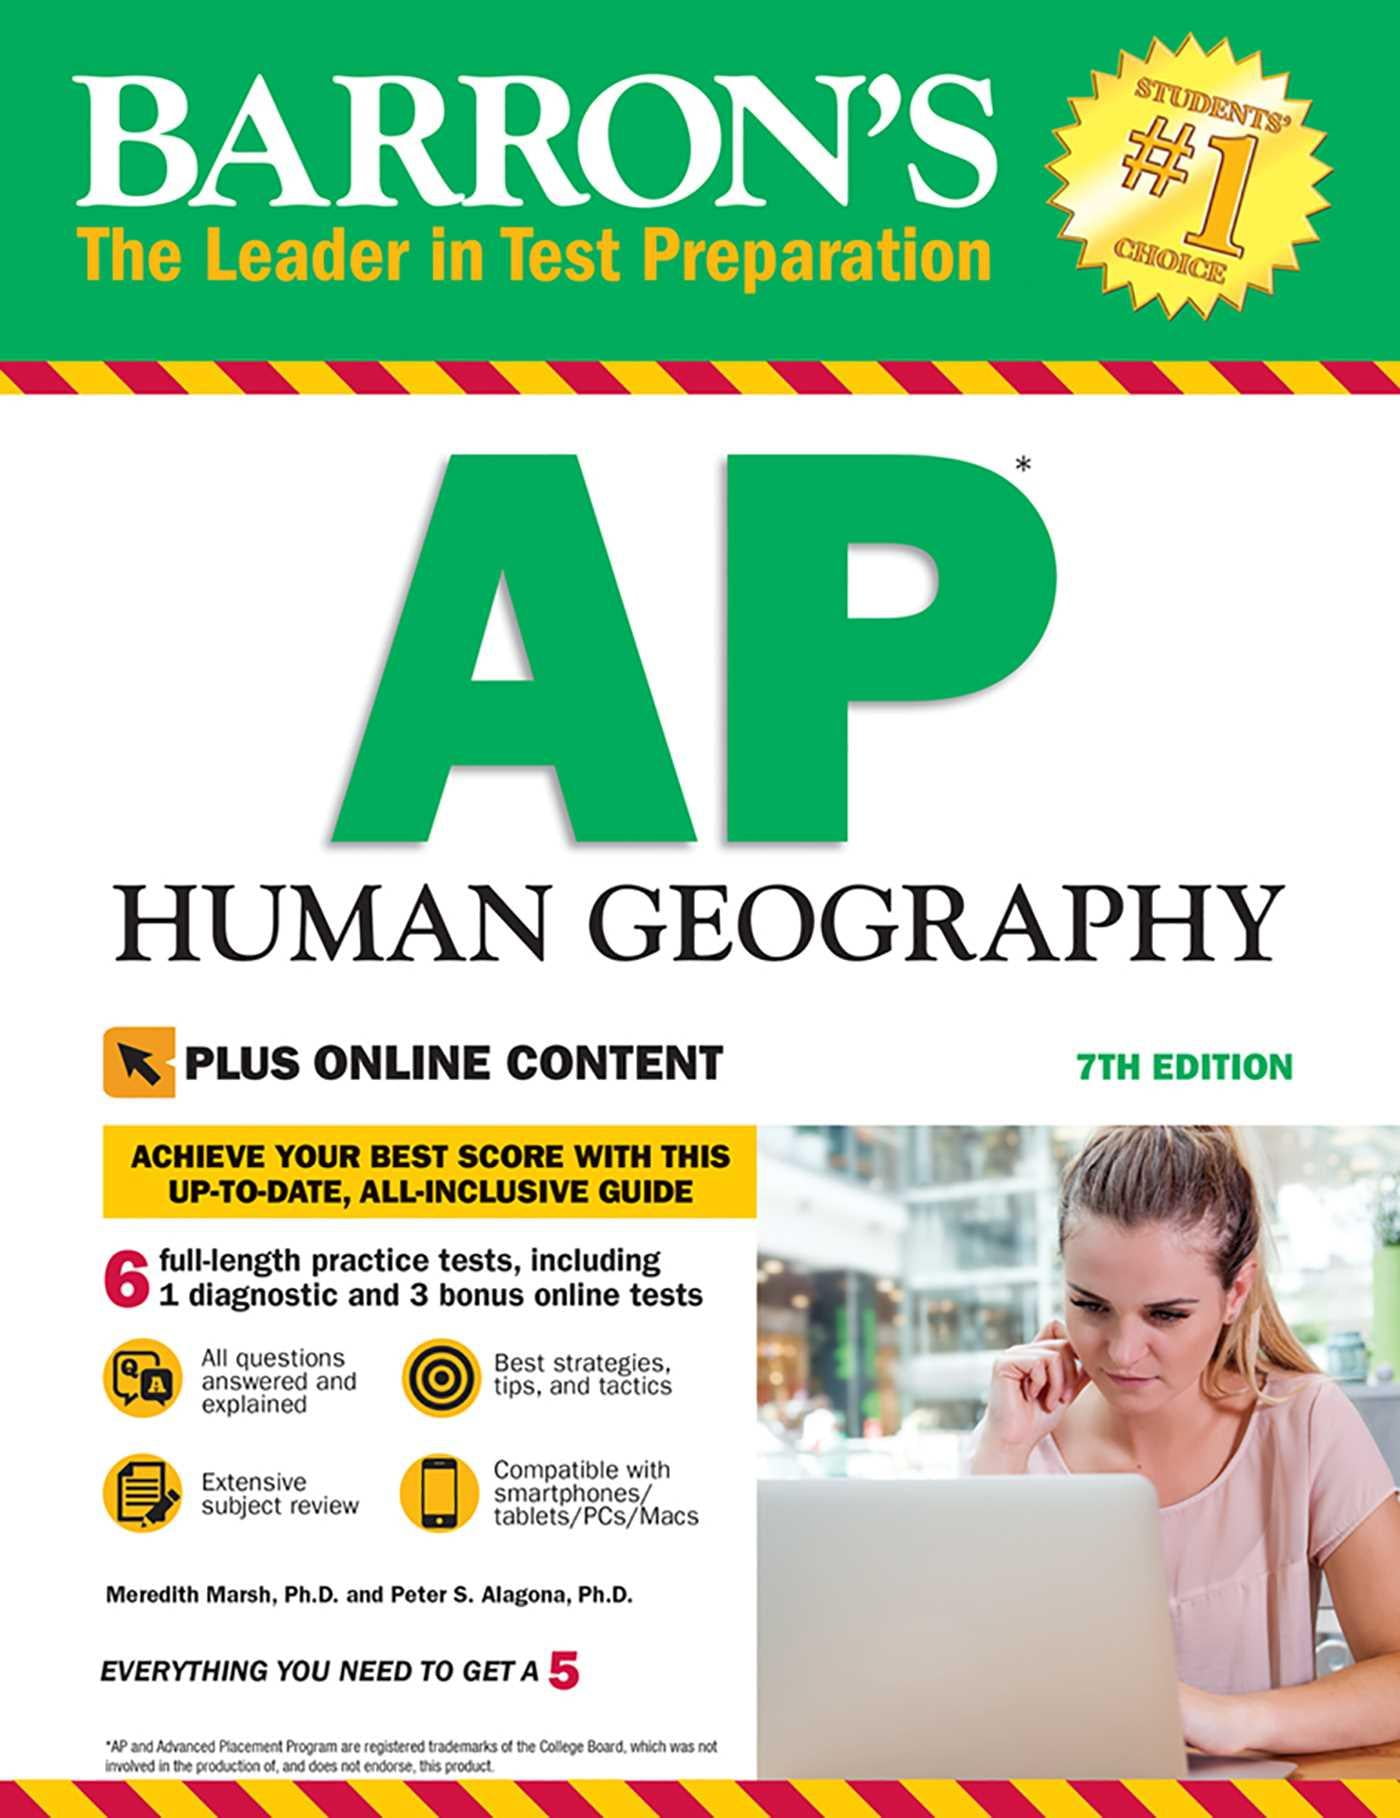 barron-s-test-prep-barron-s-ap-human-geography-with-online-tests-edition-7-paperback